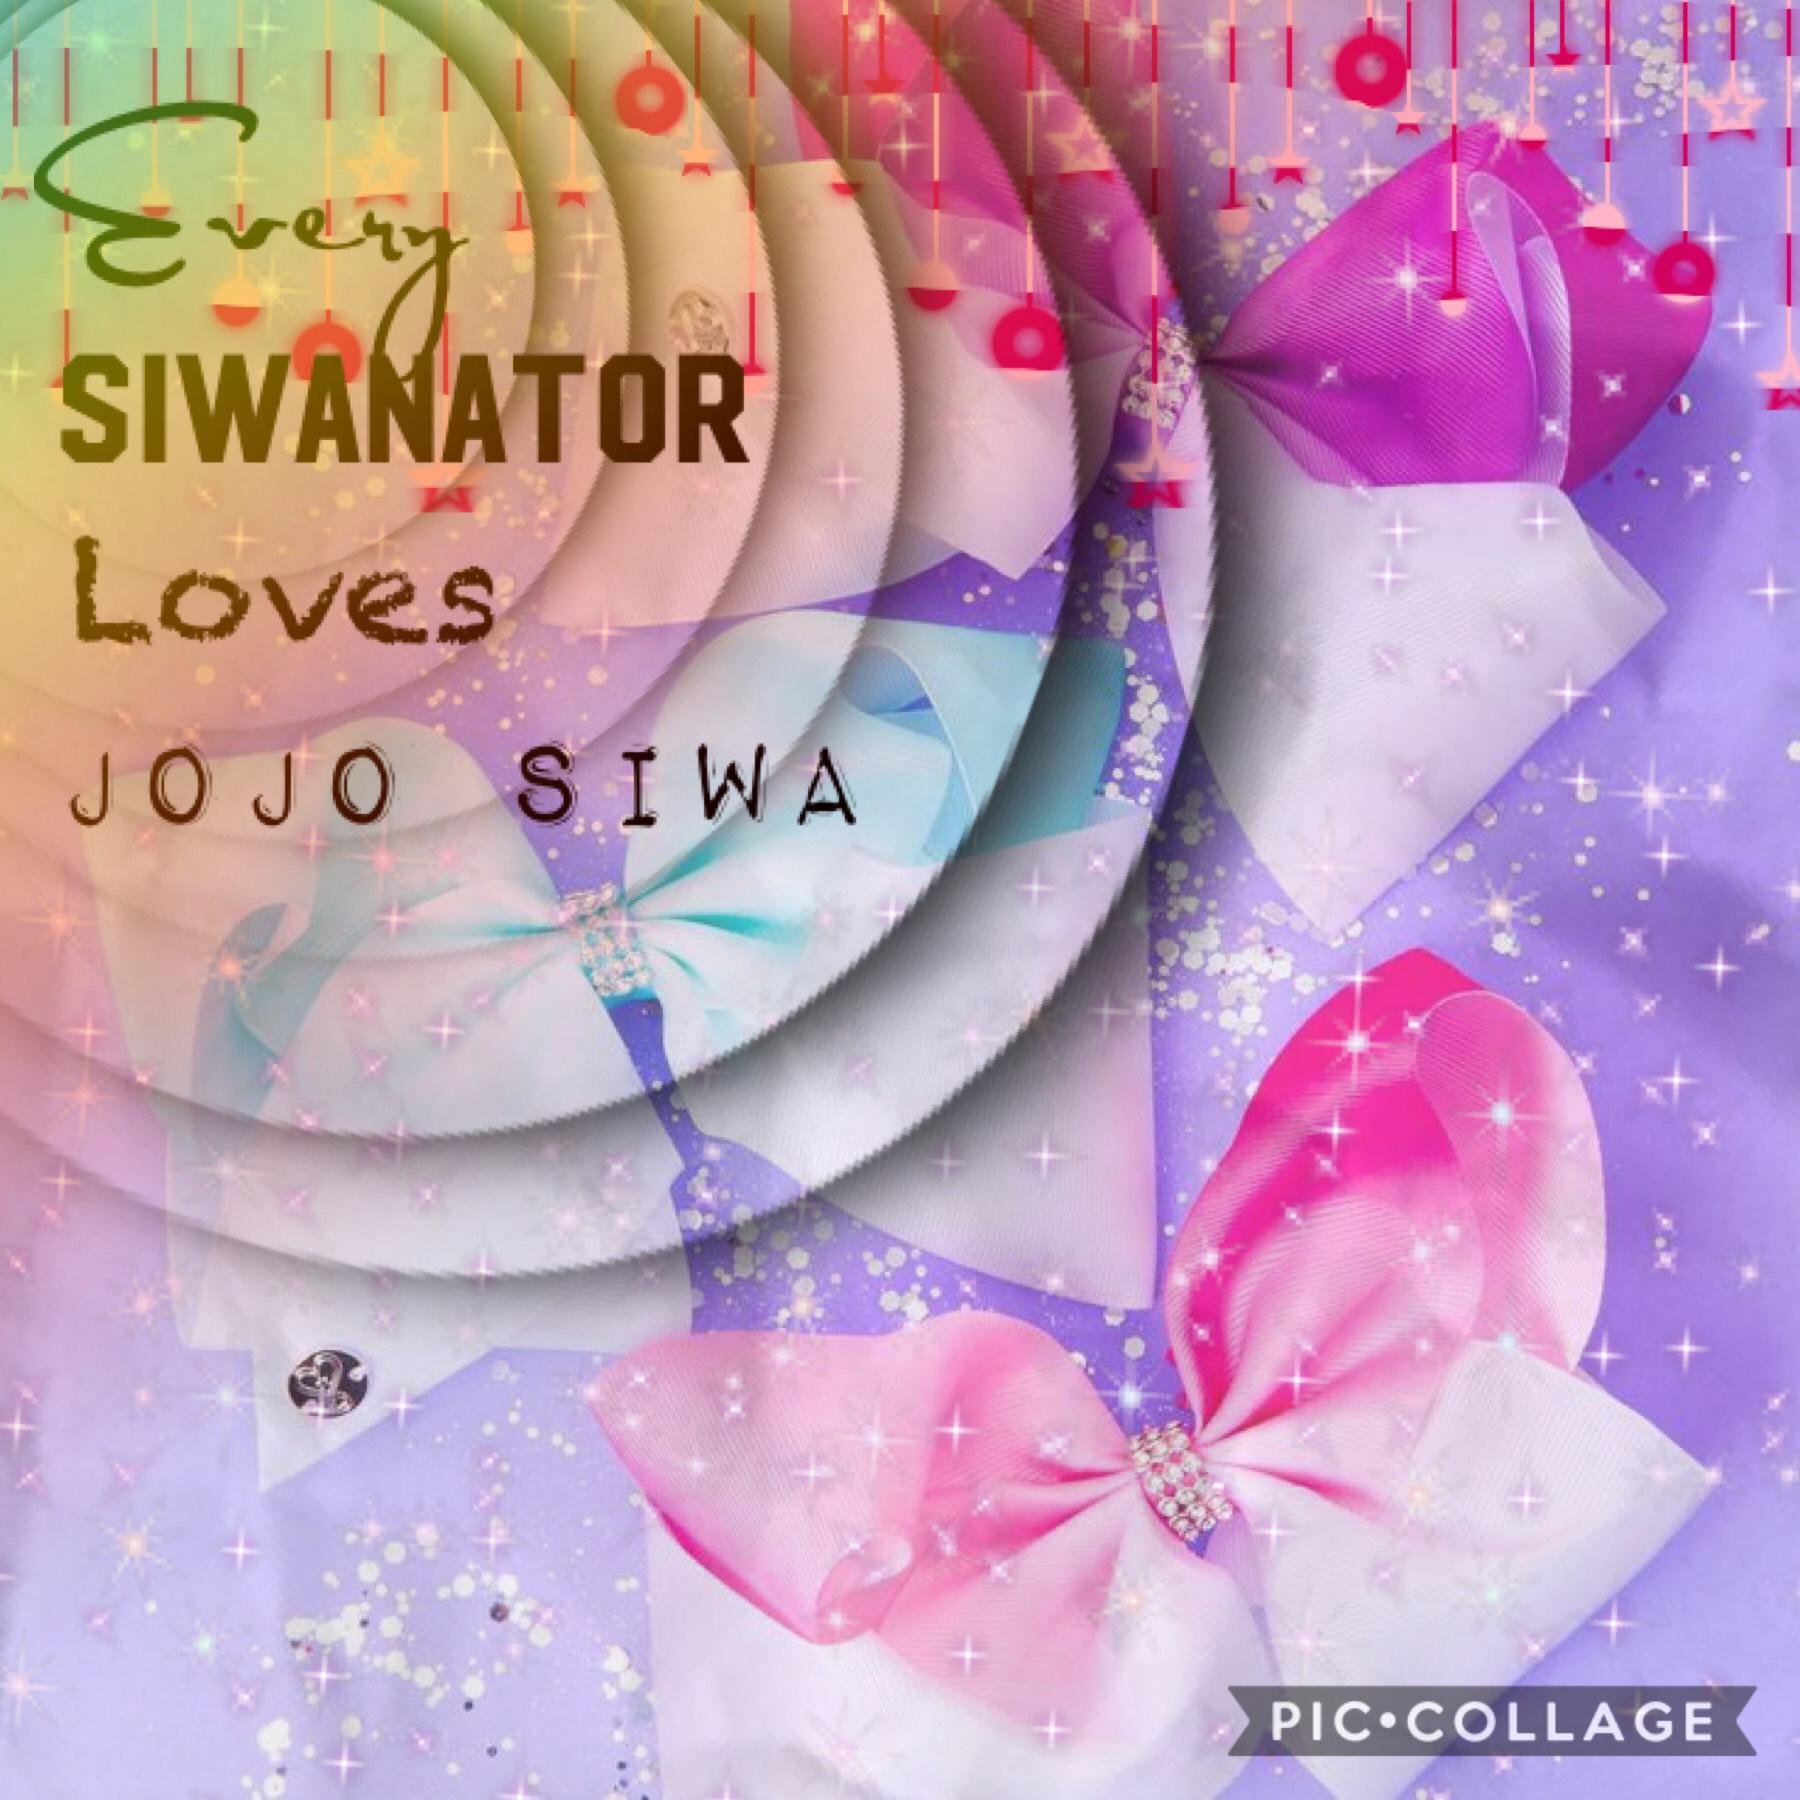 Tap💜

I really hope this one gets featured 
QOTD: Do you have any JoJo Siwa Bows if so how many do you have
AOTD: I have 8 JoJo Siwa Bows